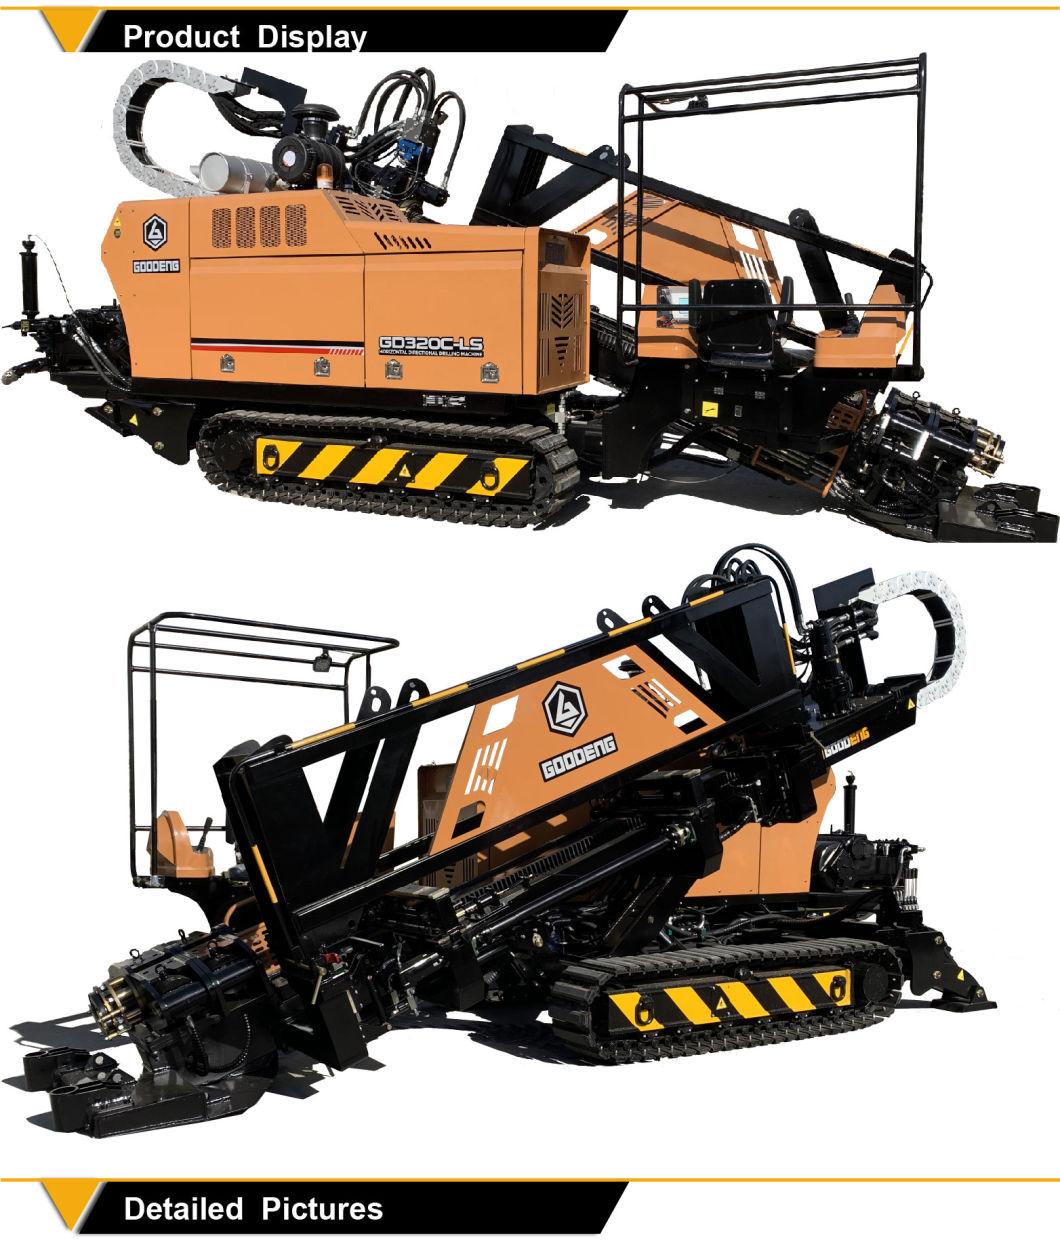 Goodeng GD320-LS HDD rig trenchless machine